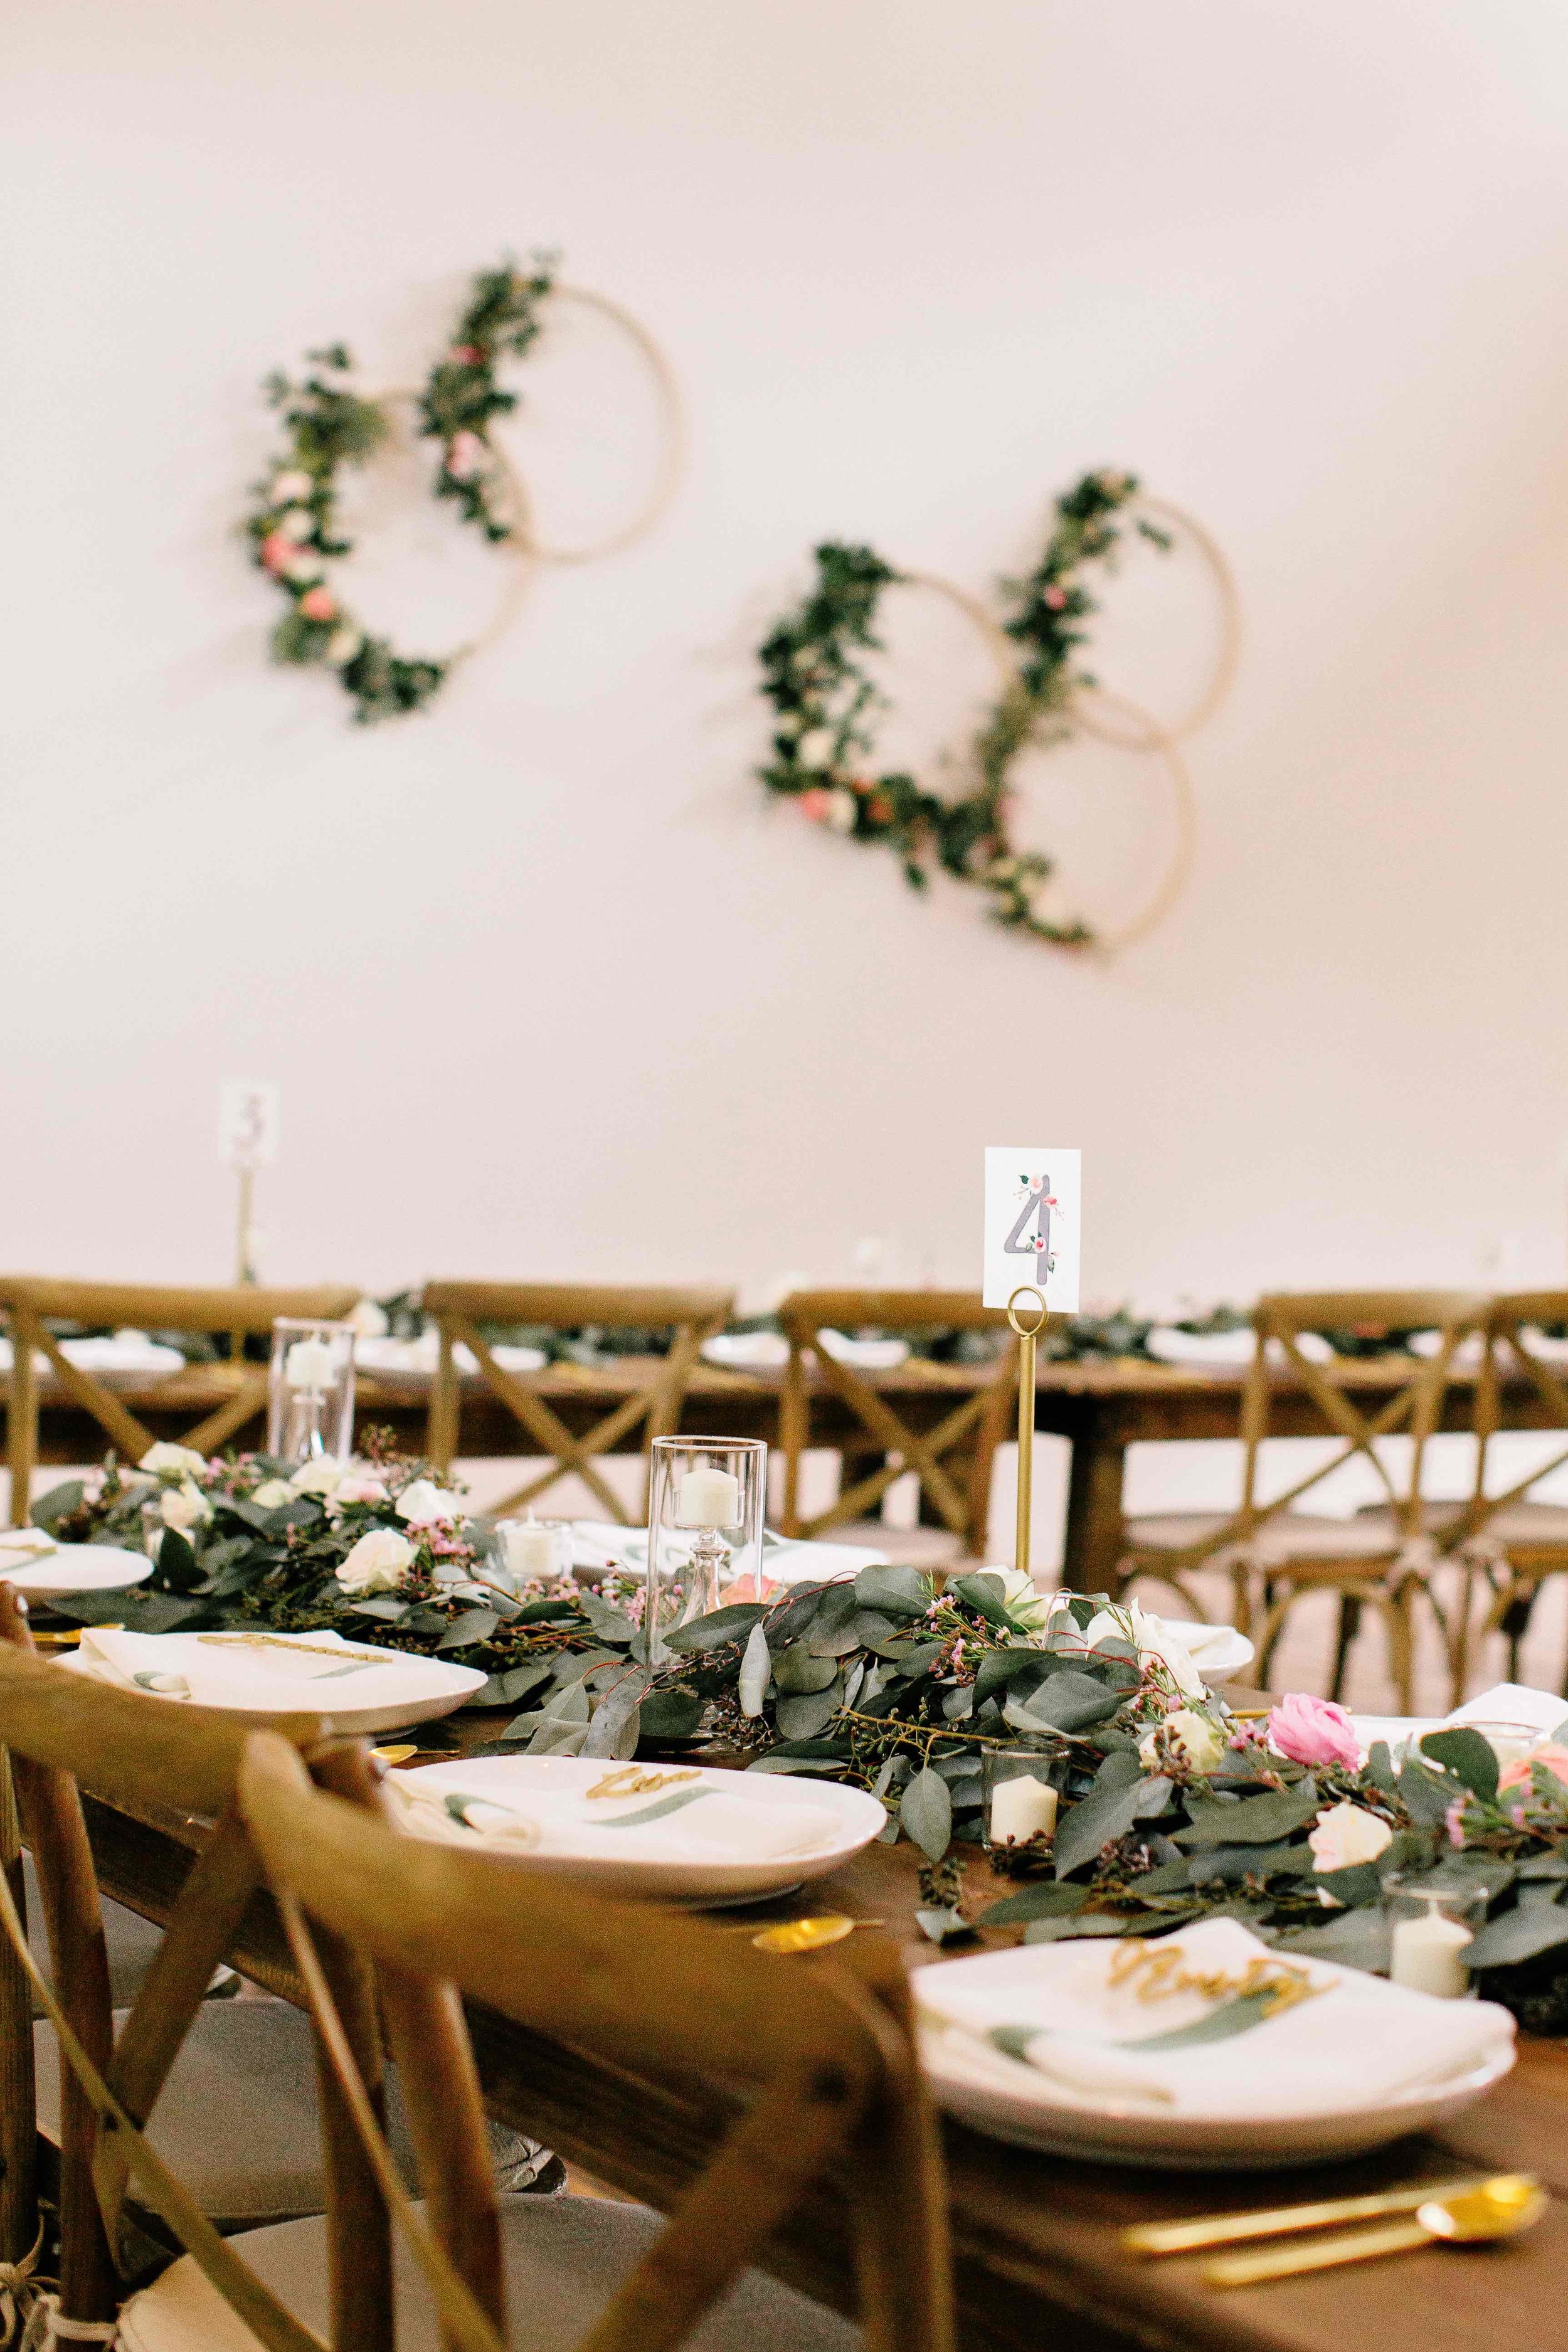 Organic garlands of greenery and flowers // floral table runners